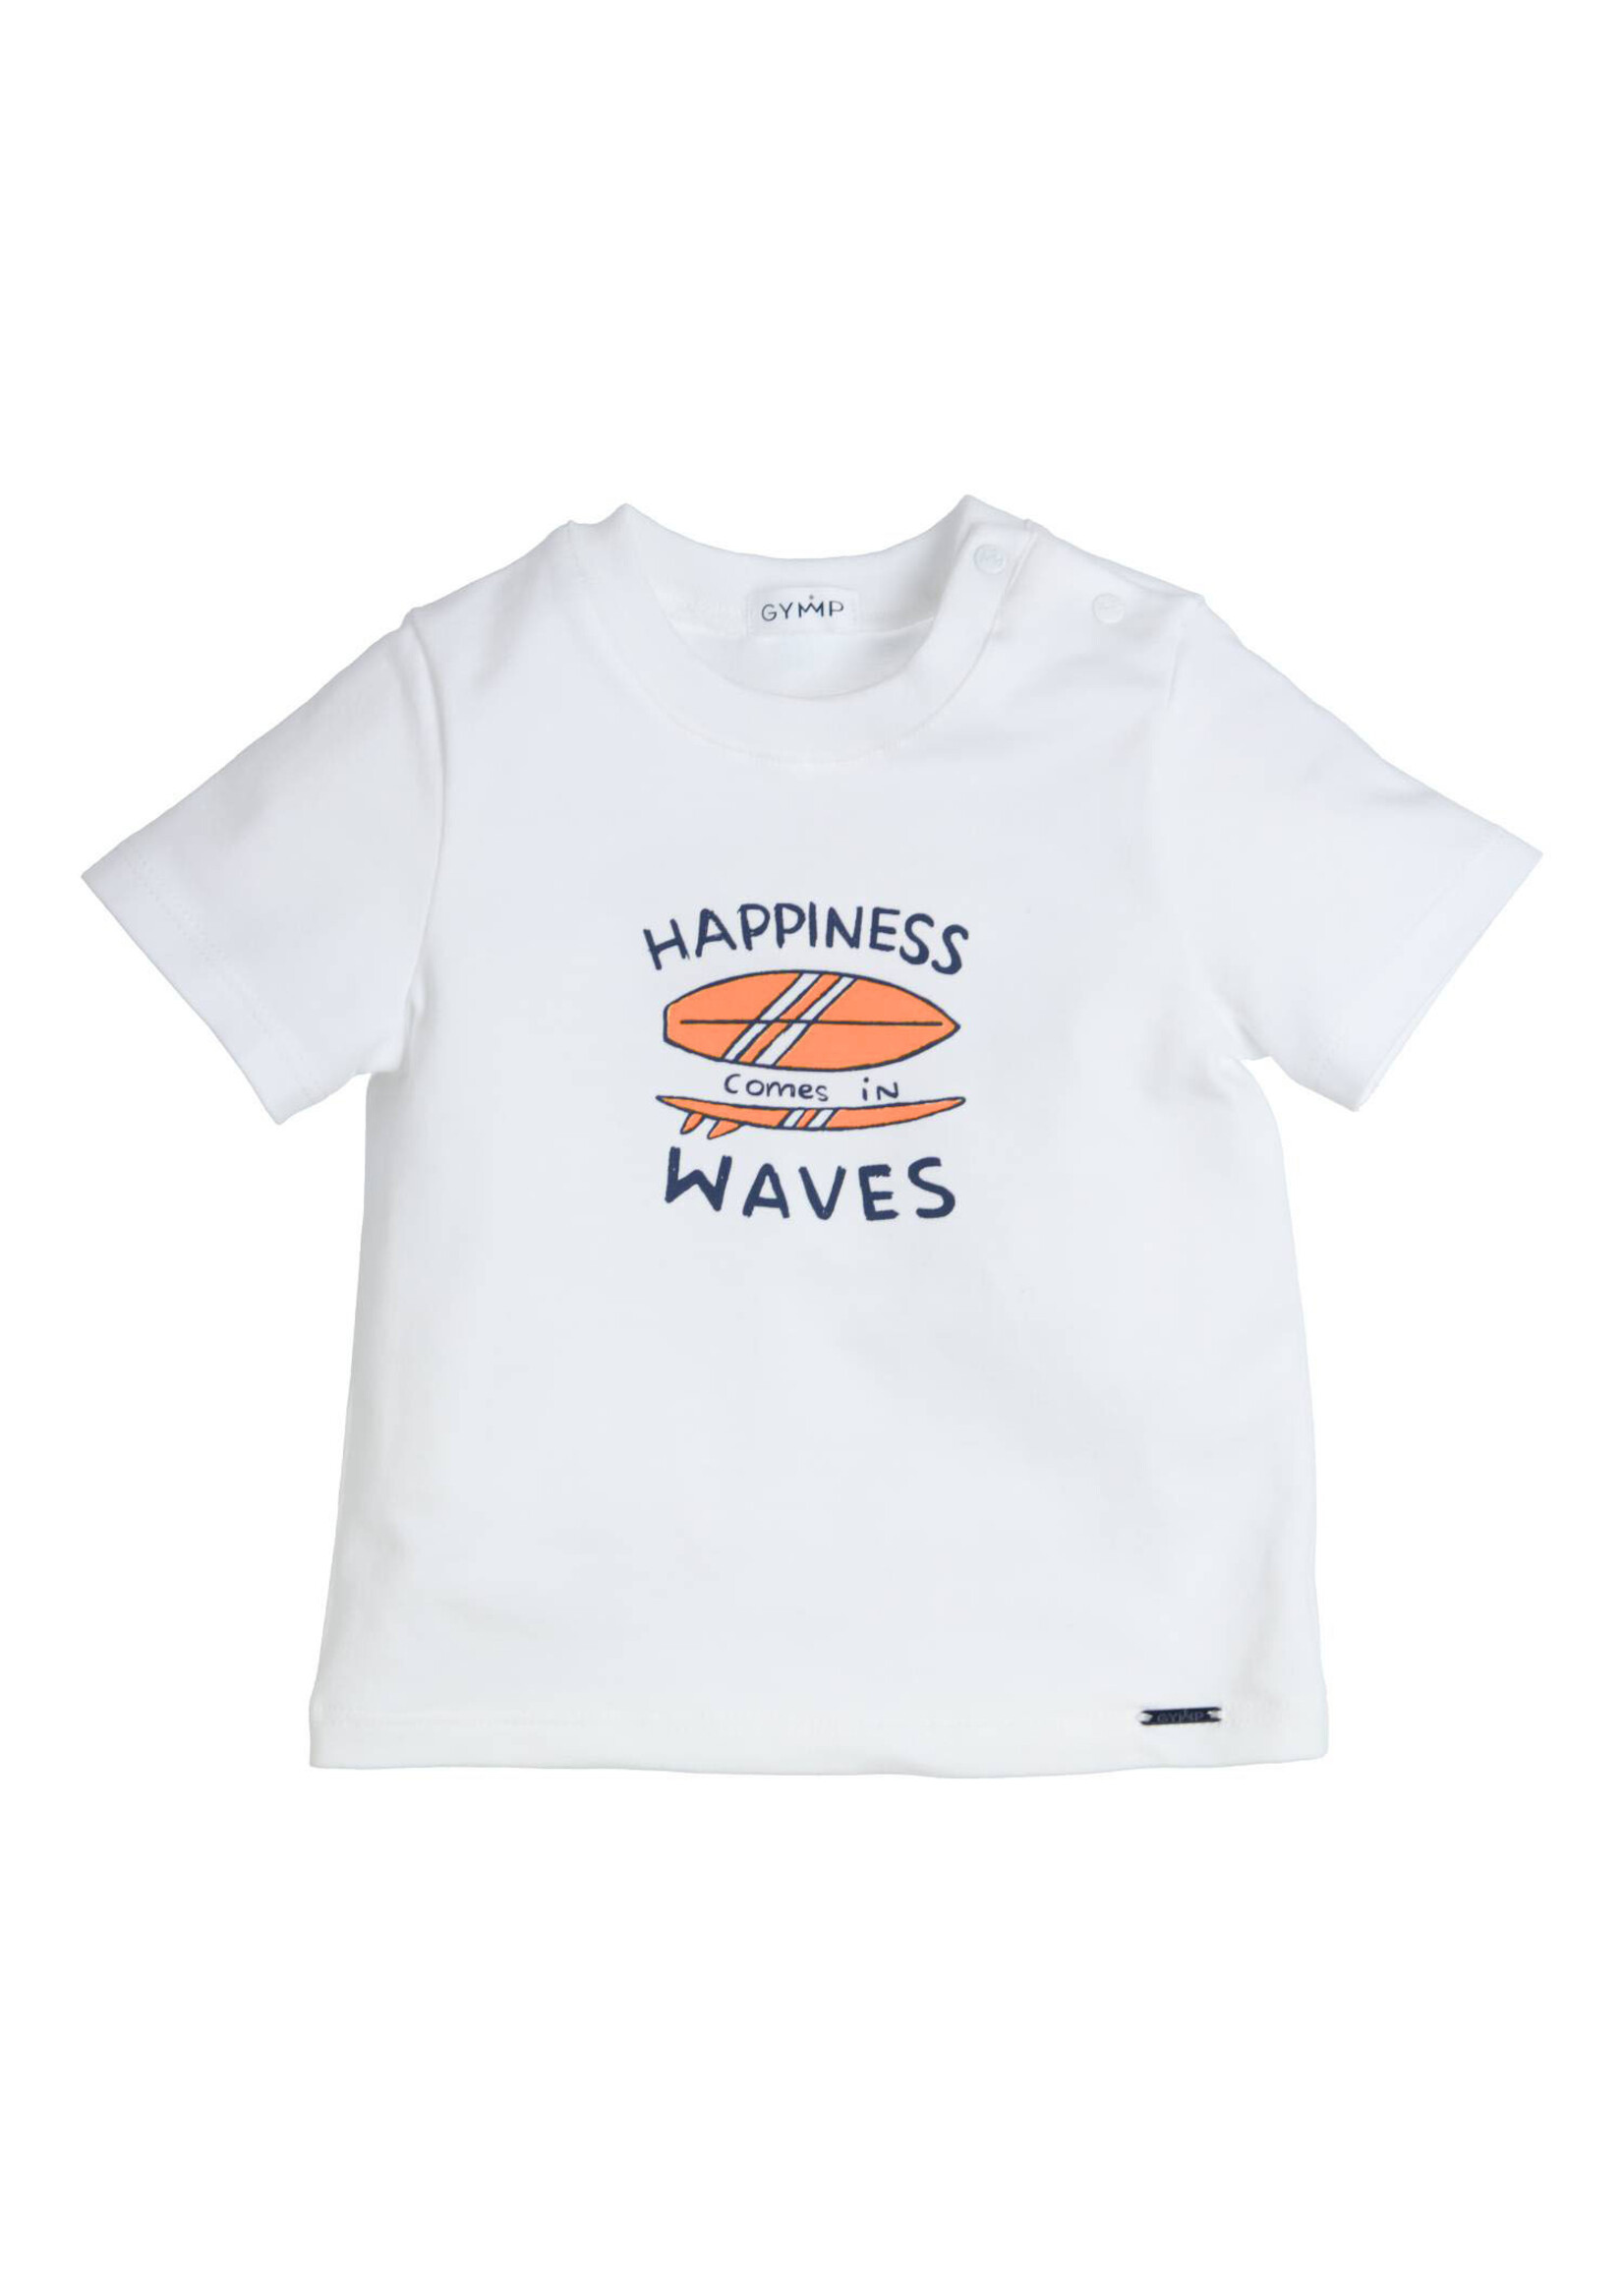 Gymp Boys T-shirt Aerobic Happiness comes in waves 353-4433-20 White